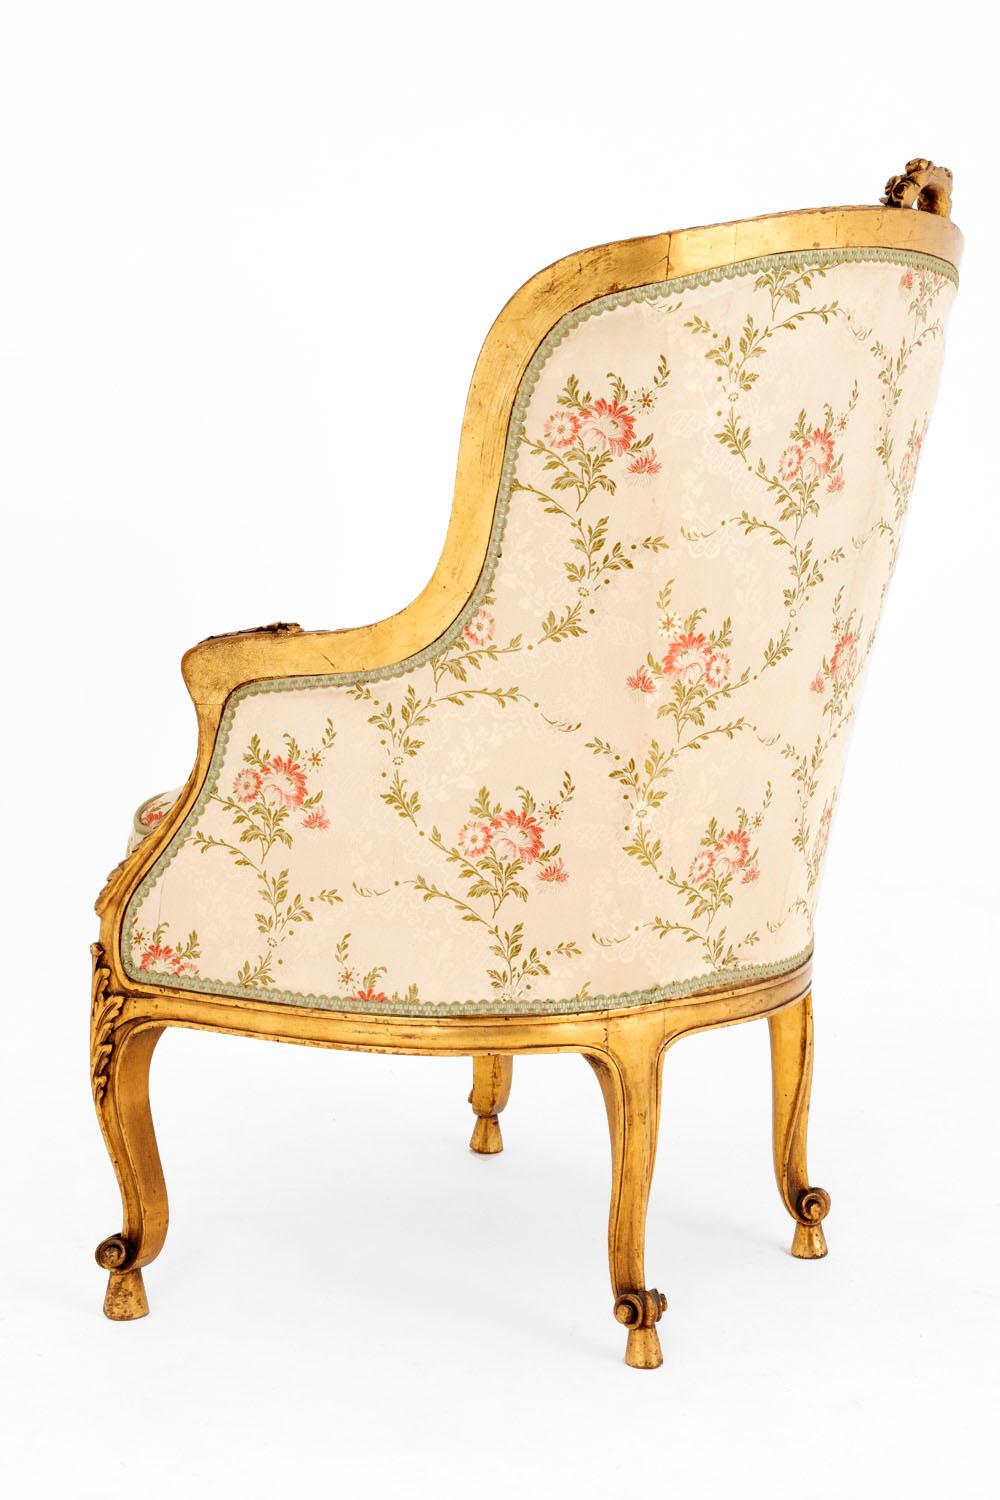 Transition Style Bergere in Giltwood, circa 1880 4